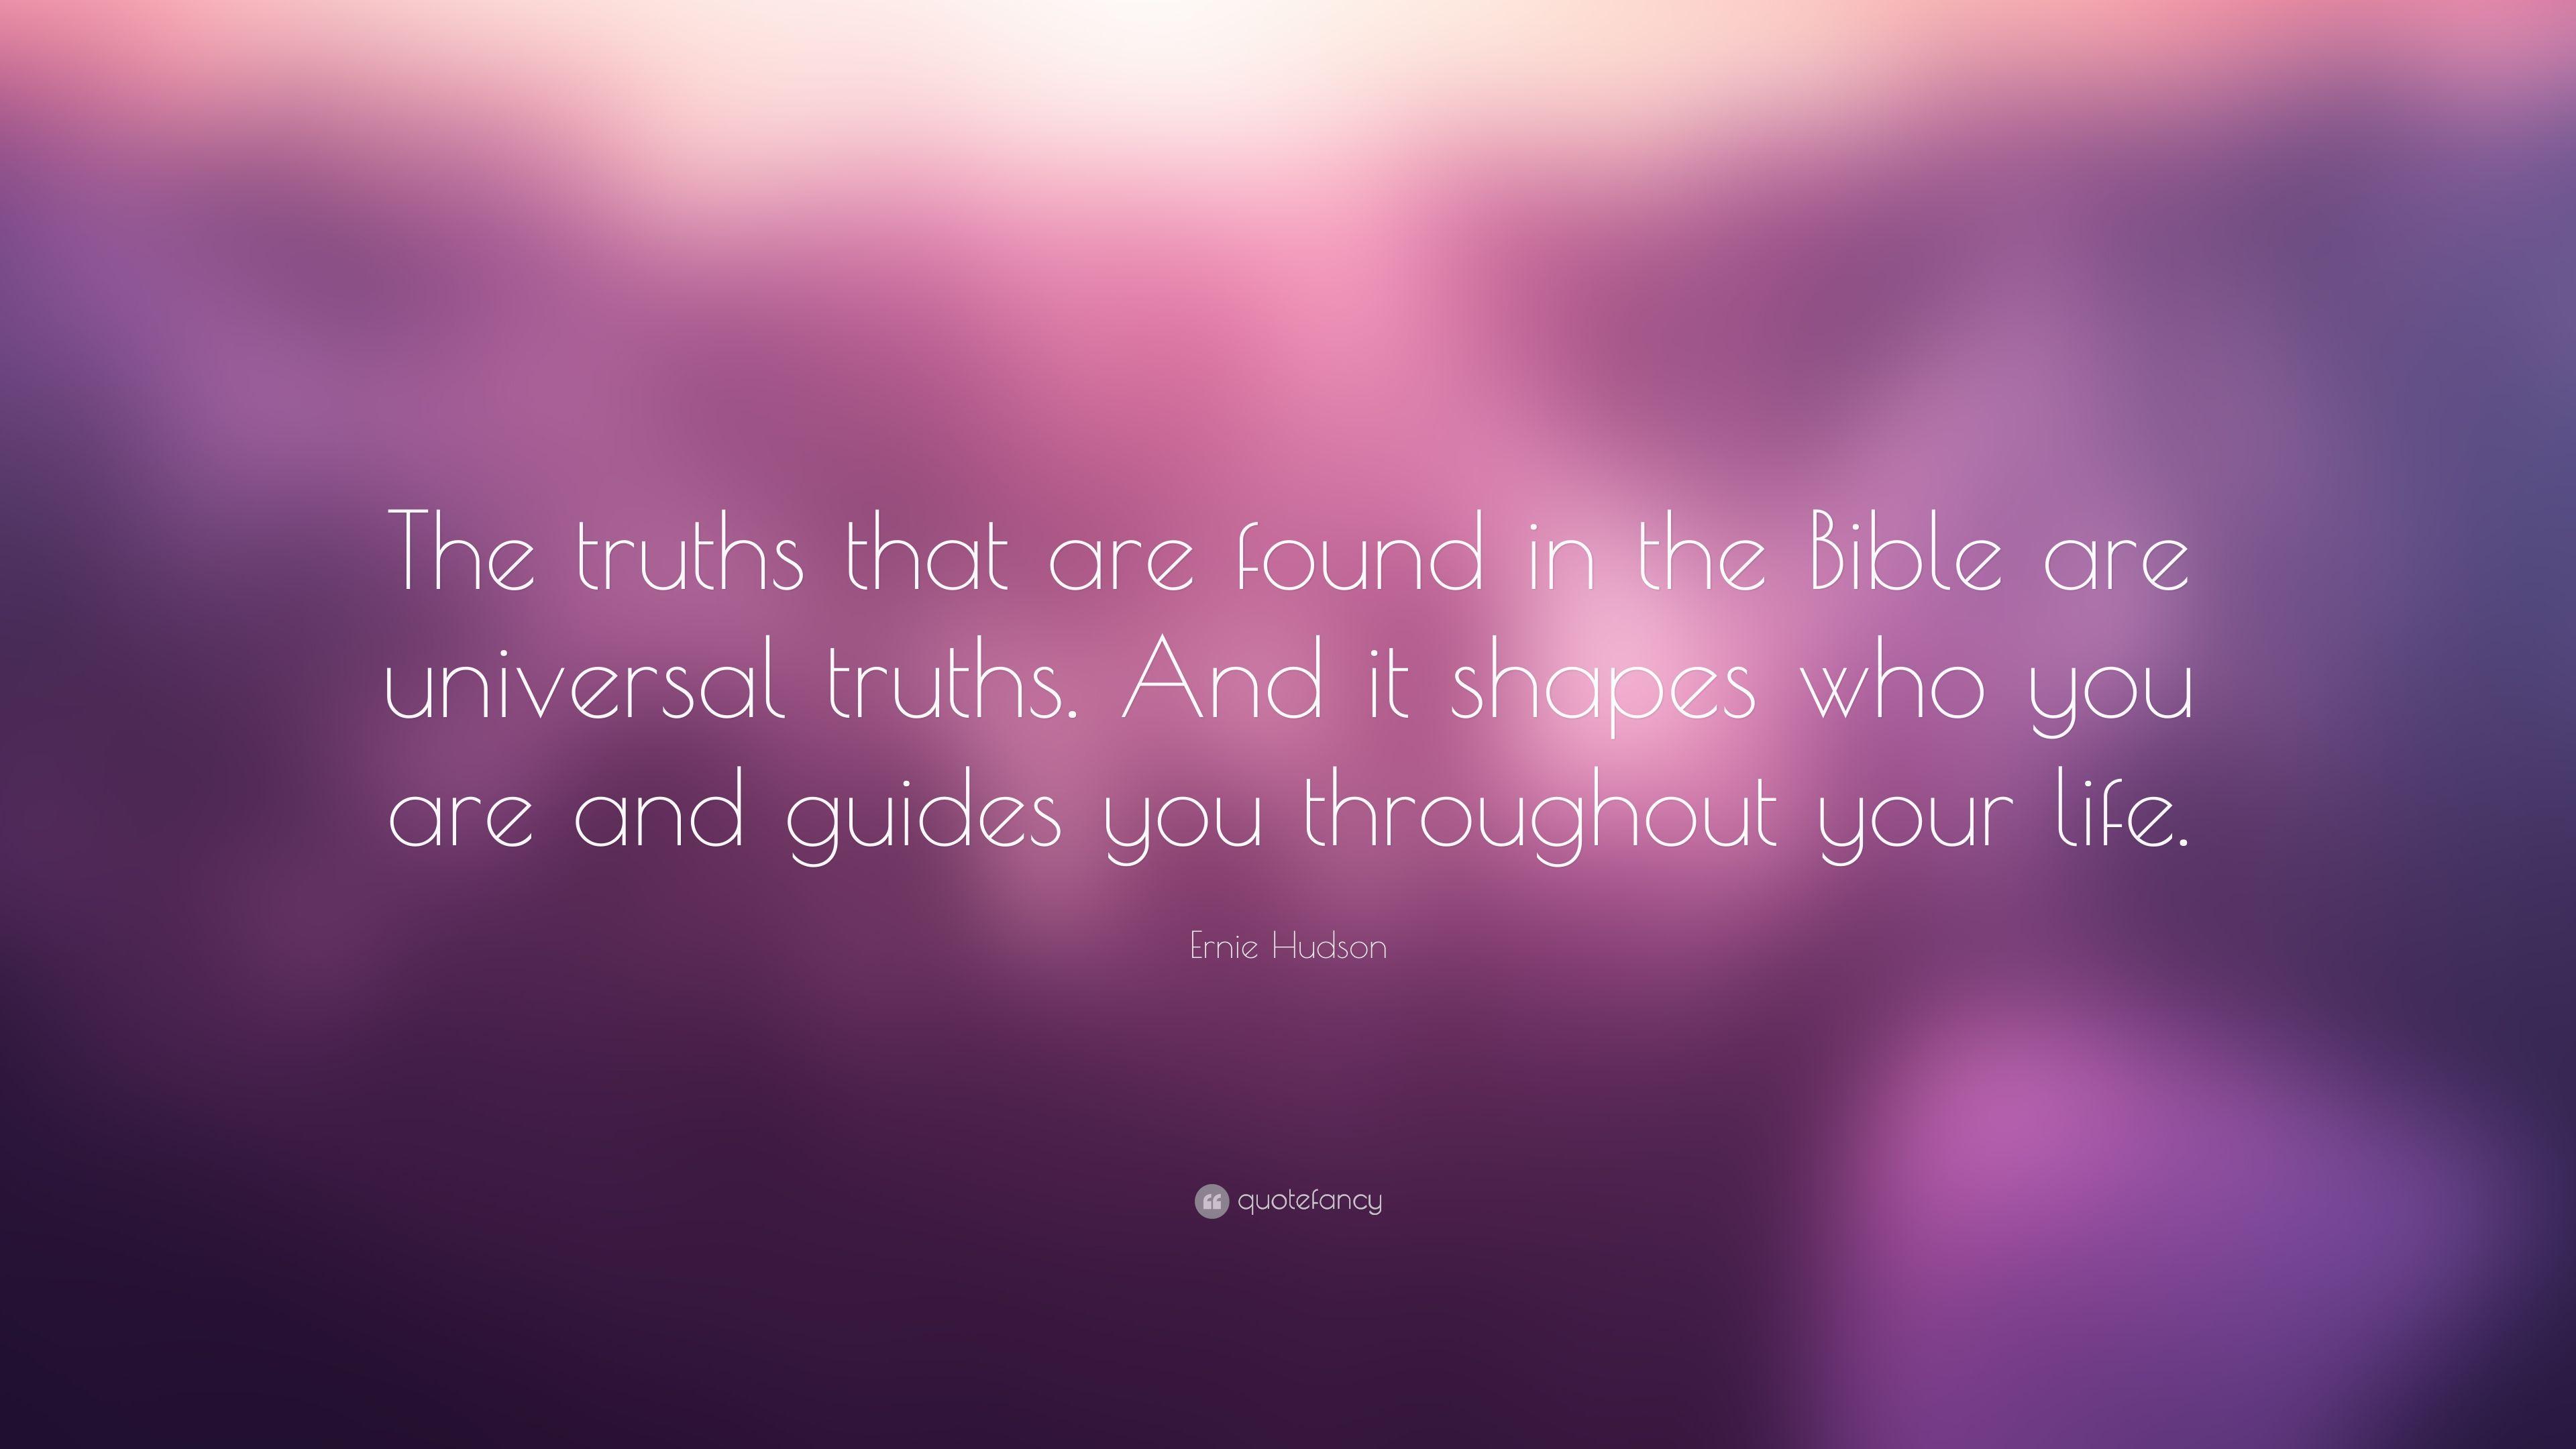 Ernie Hudson Quote: “The truths that are found in the Bible are